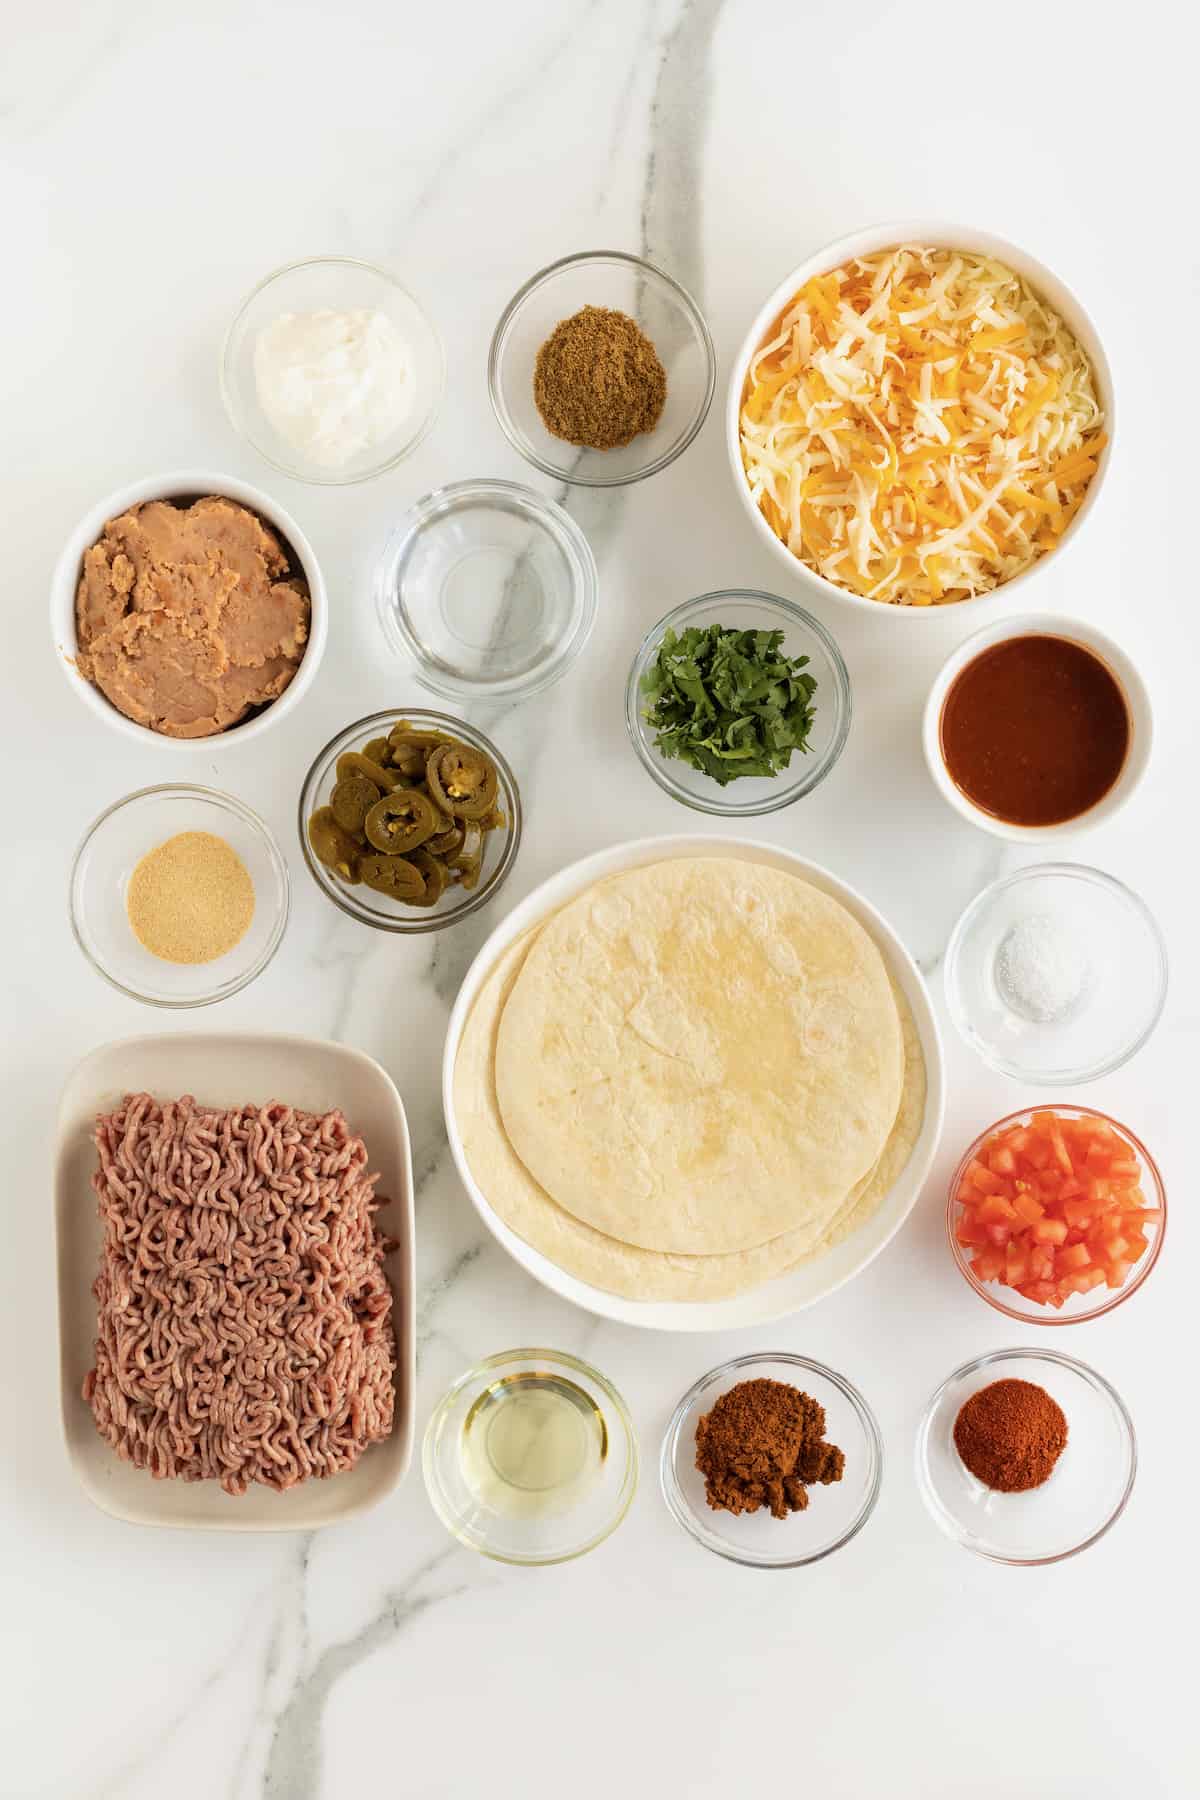 Canola oil, ground beef, chili powder, garlic powder, ground cumin, paprika, kosher salt, water, flour tortillas, refried beans, shredded Monterrey jack and cheddar cheese blend, enchilada sauce, diced fresh tomato, sliced jalapeño peppers, chopped fresh cilantro, sour cream in small glass containers. 
